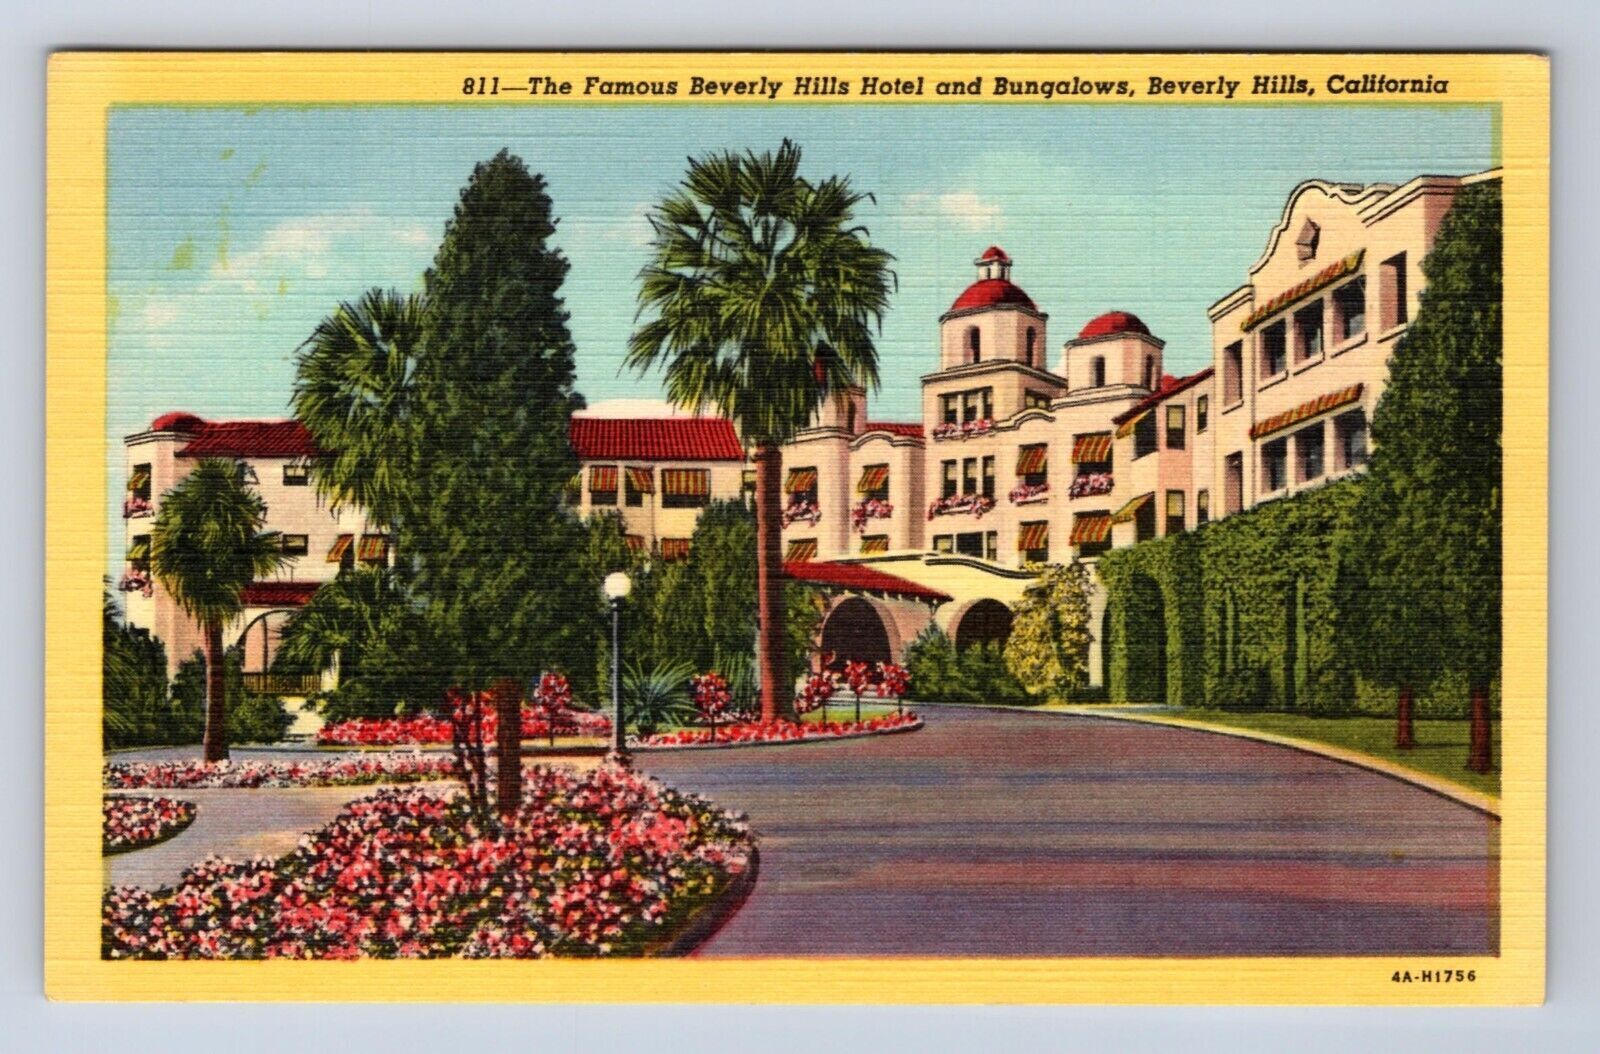 VINTAGE FAMOUS BEVERLY HILLS HOTEL & BUNGALOWS BEVERLY HILLS CA POSTCARD HU